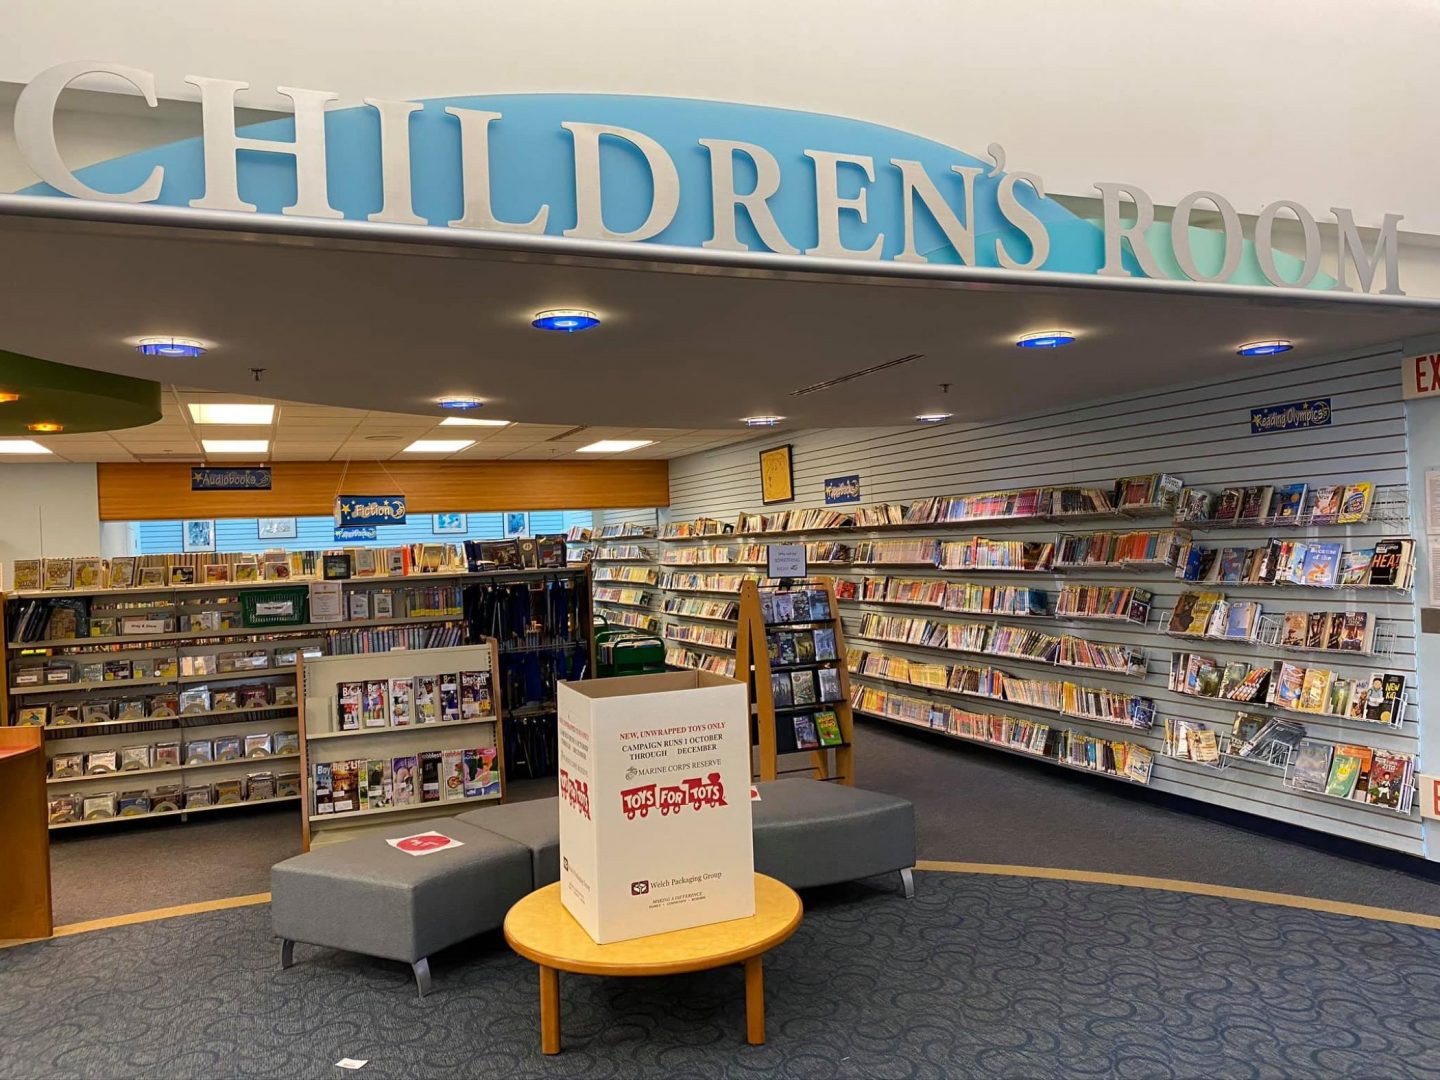 The Children’s Room is pictured at Chester County Library,